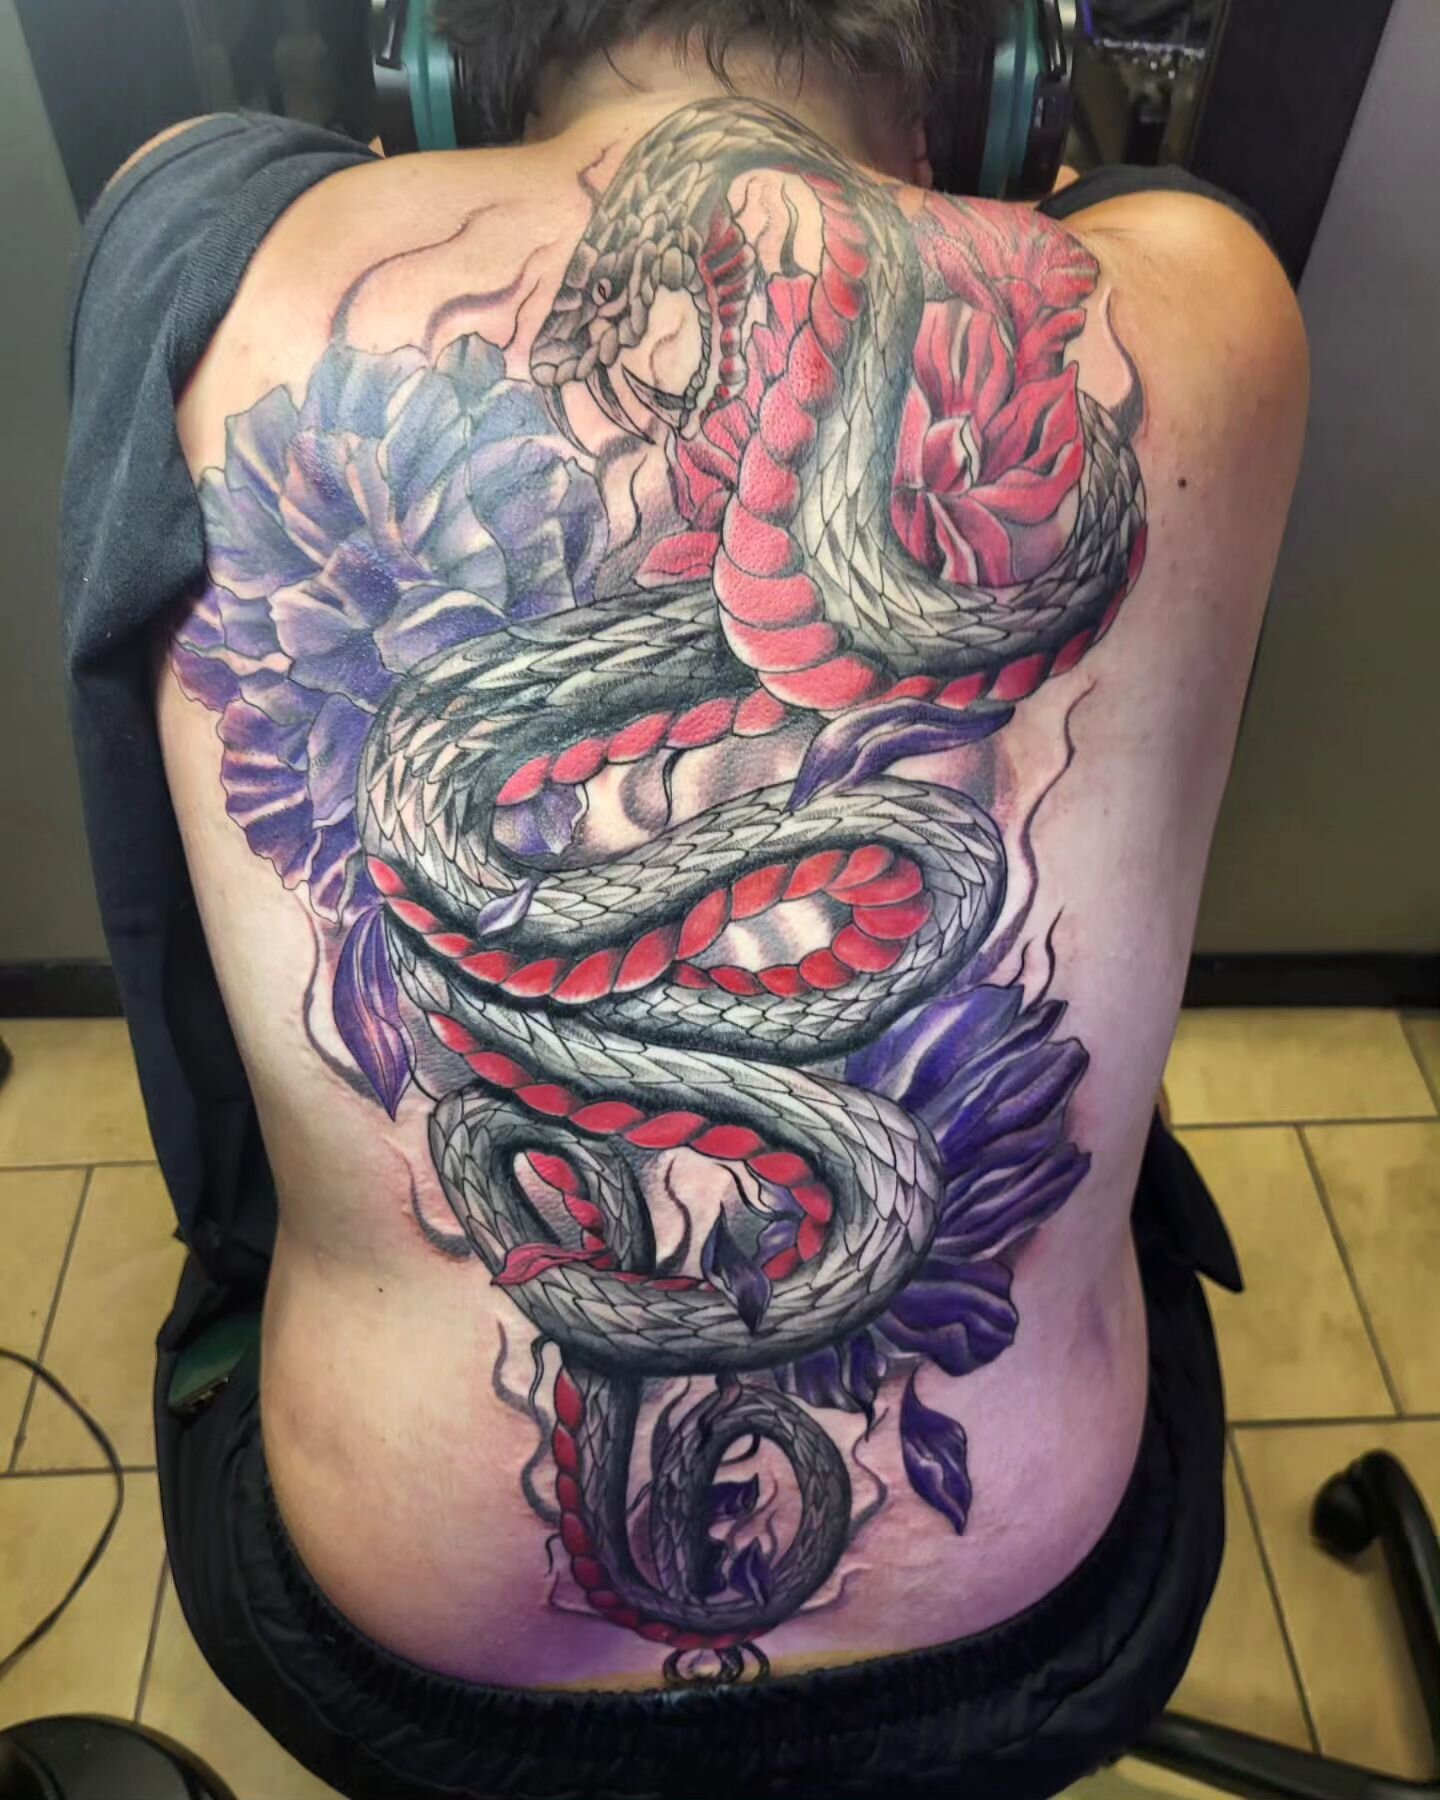 #snakebackpiece #snaketattoo #houseofcolourtattoo #allenjenkinstattoo one more session on this one #ouch